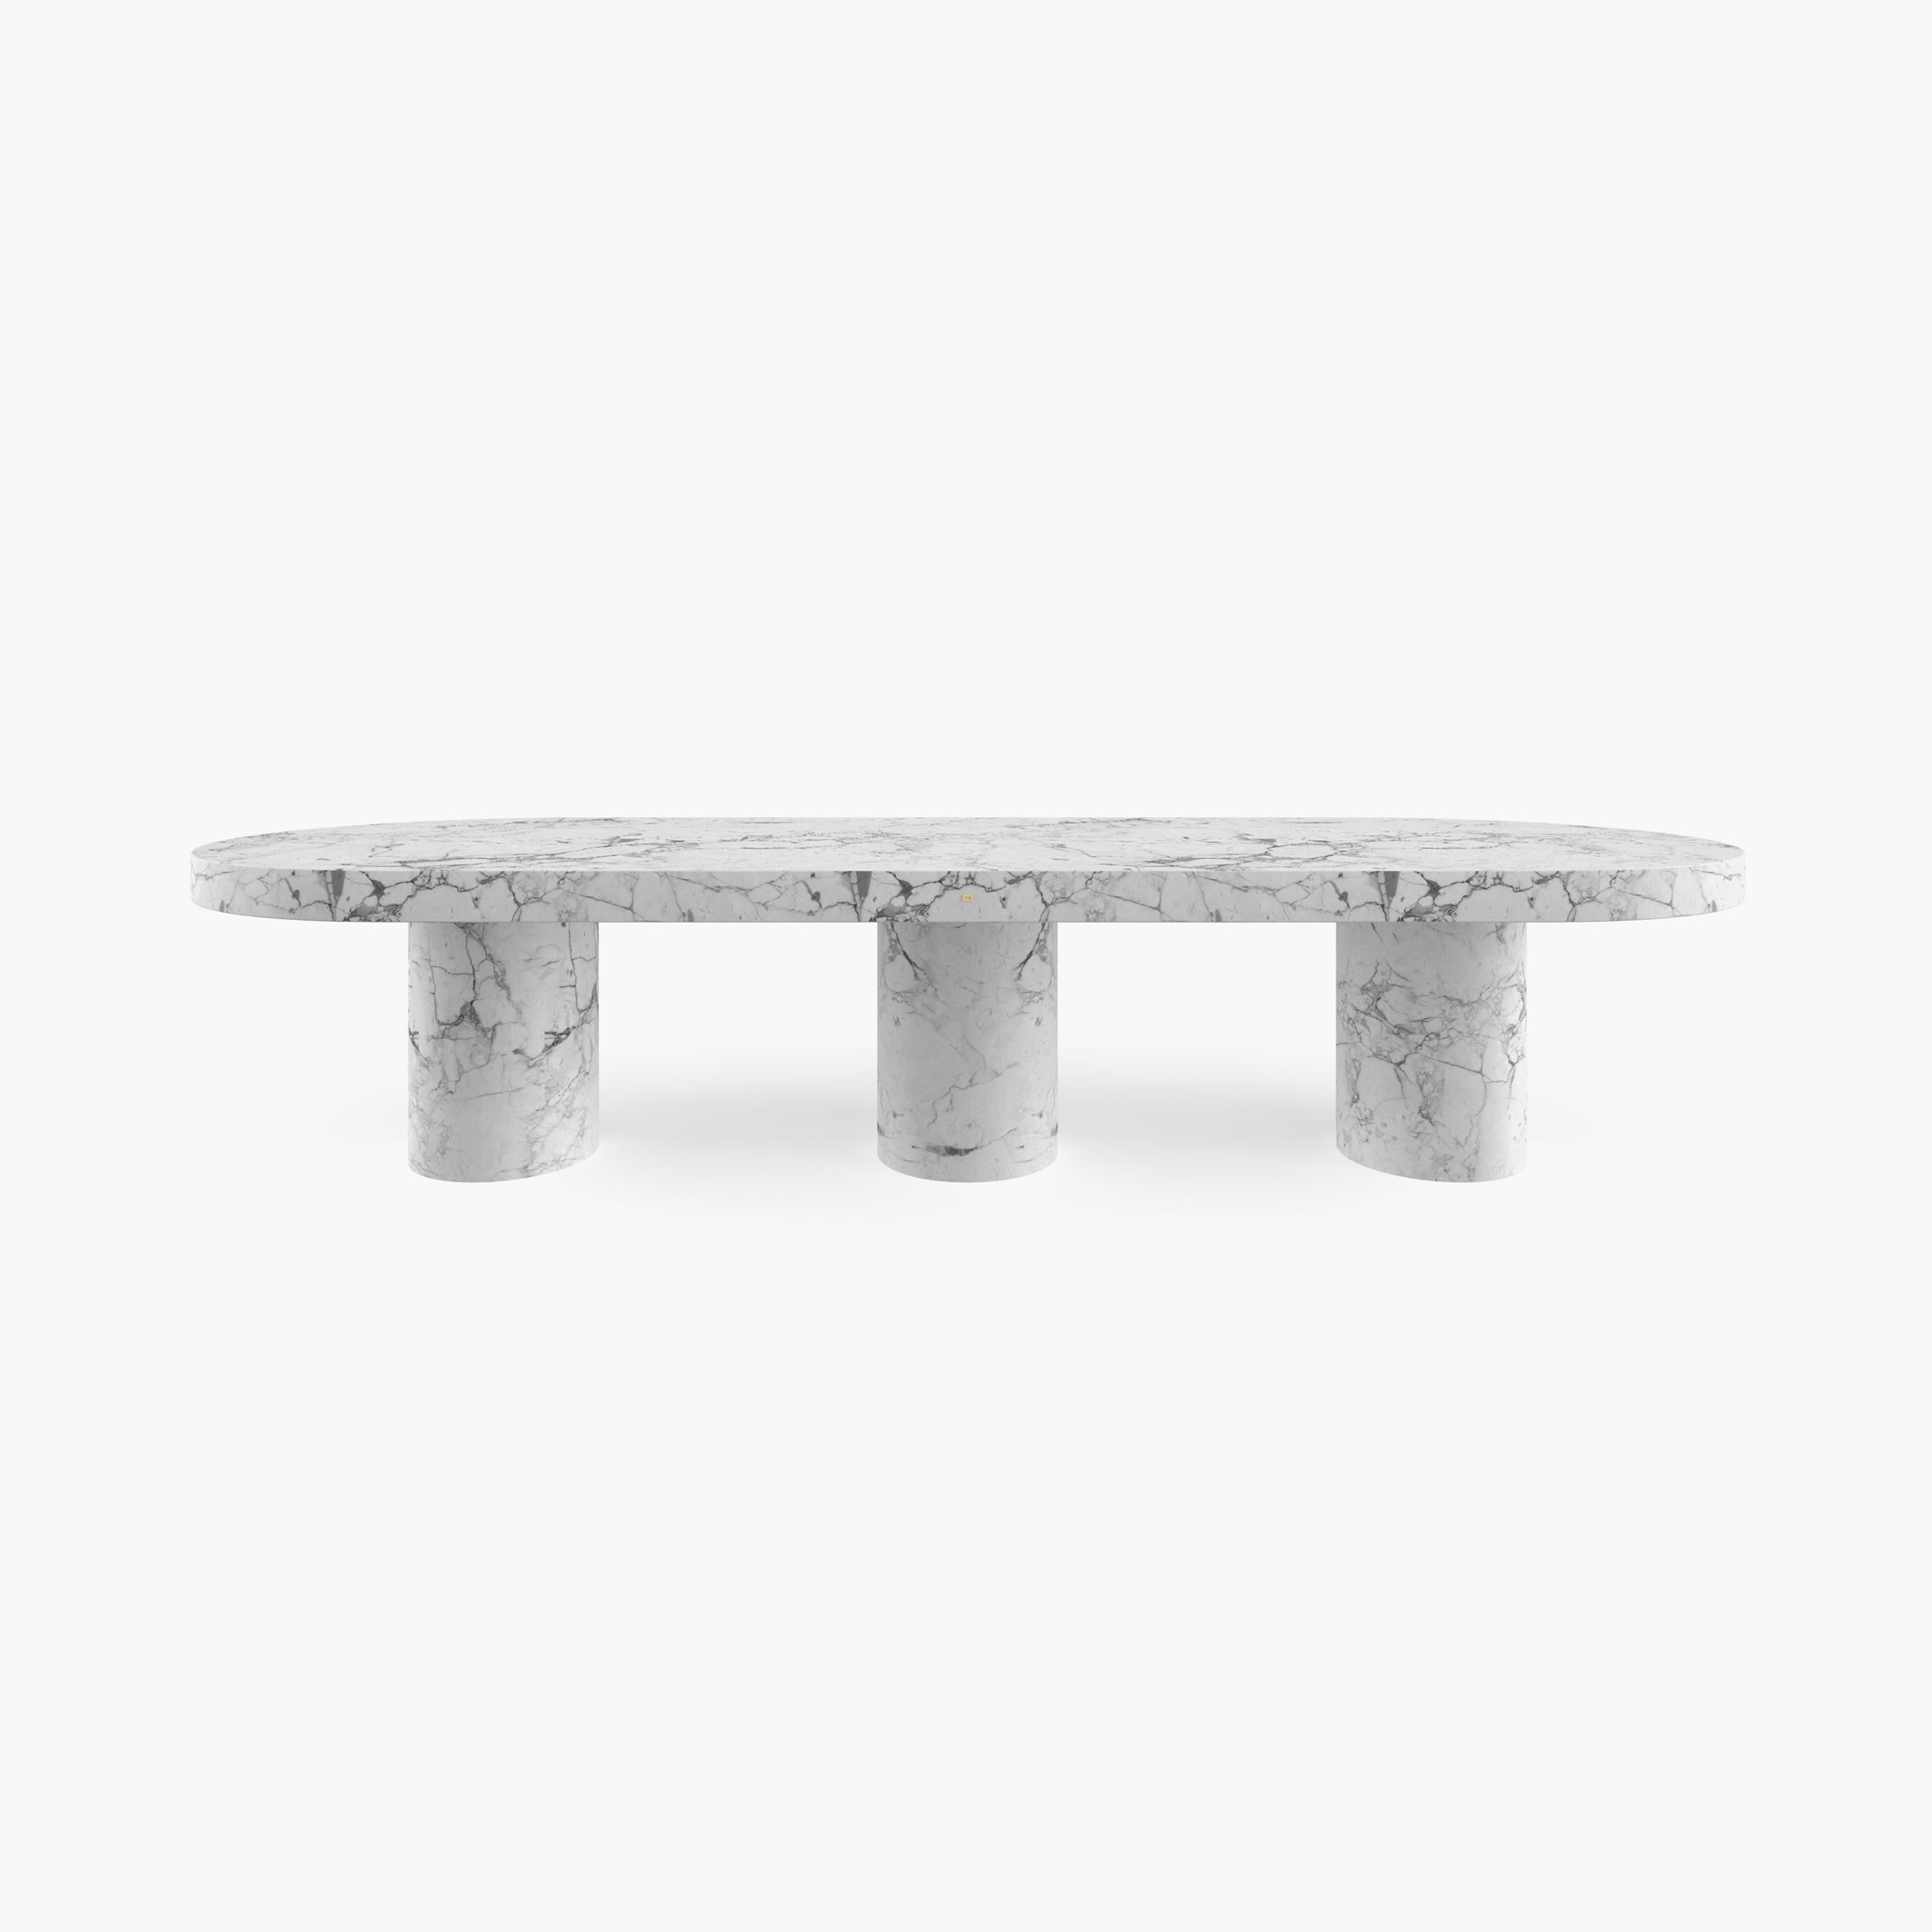 Dining Table large Cylinder legs White Arabescato Marble elegant Dining Room piece of art Dining Tables FS 179 FELIX SCHWAKE